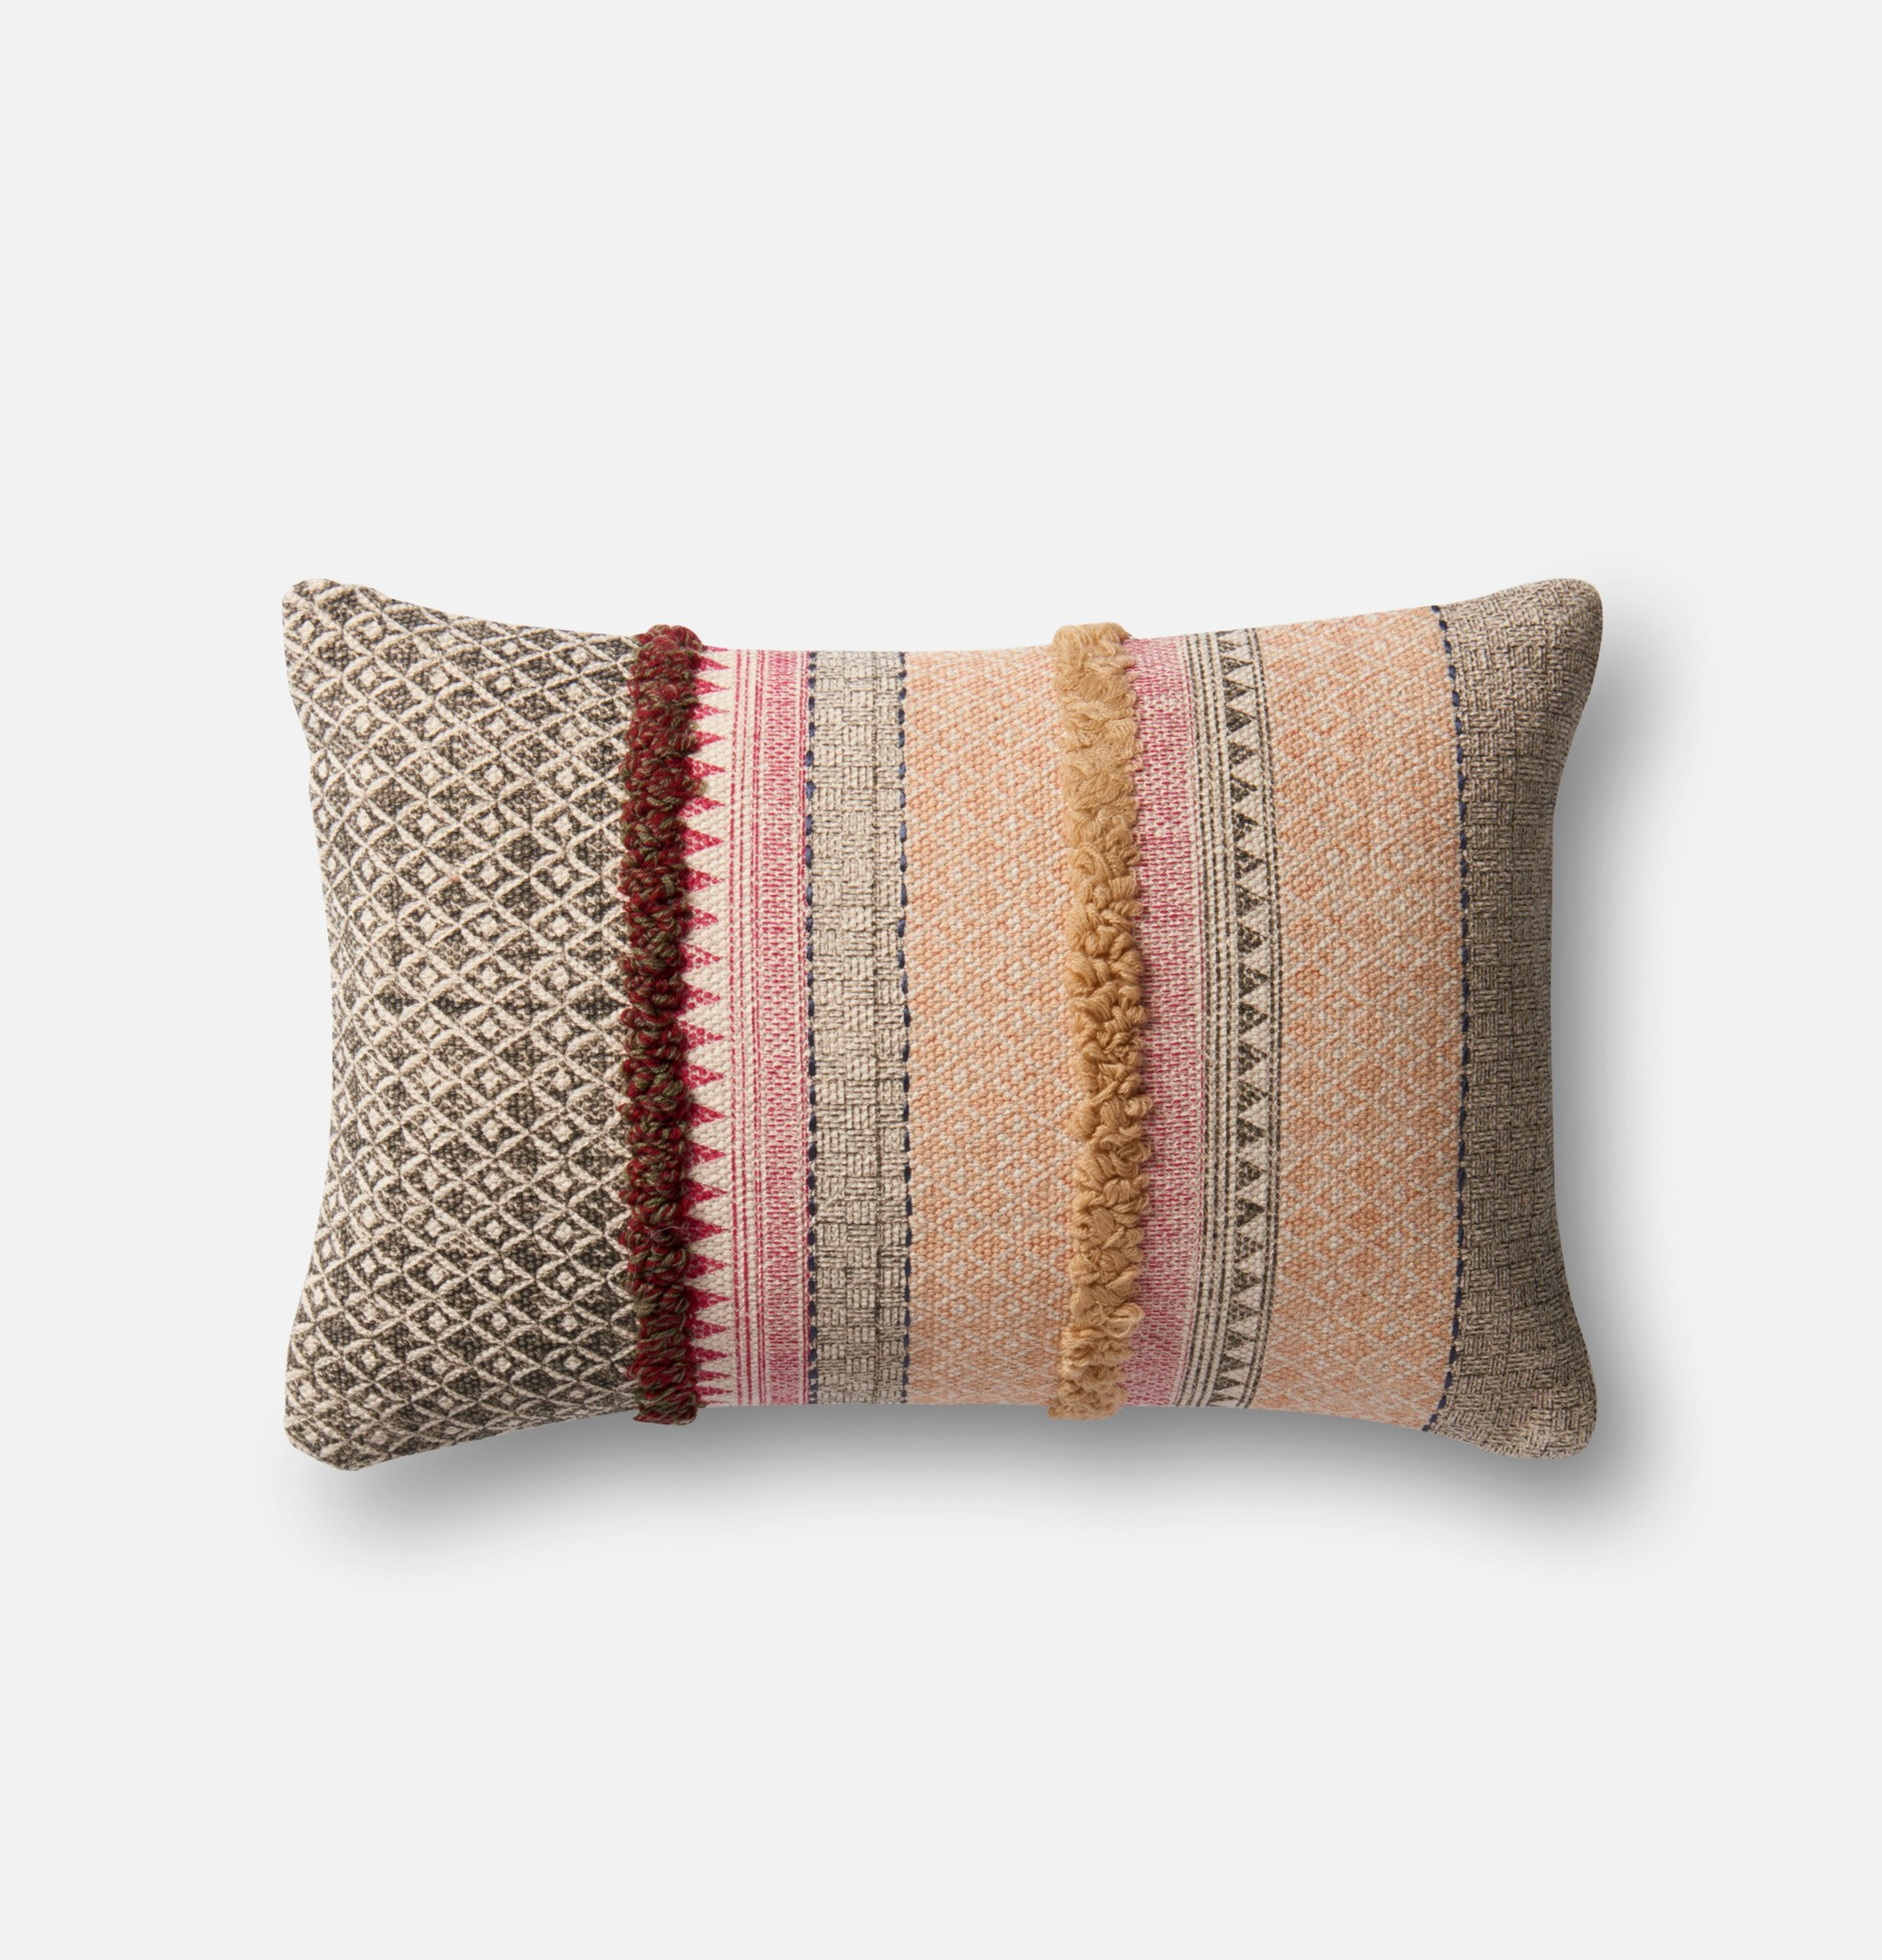 PILLOWS - PINK / BEIGE - Loloi Rugs